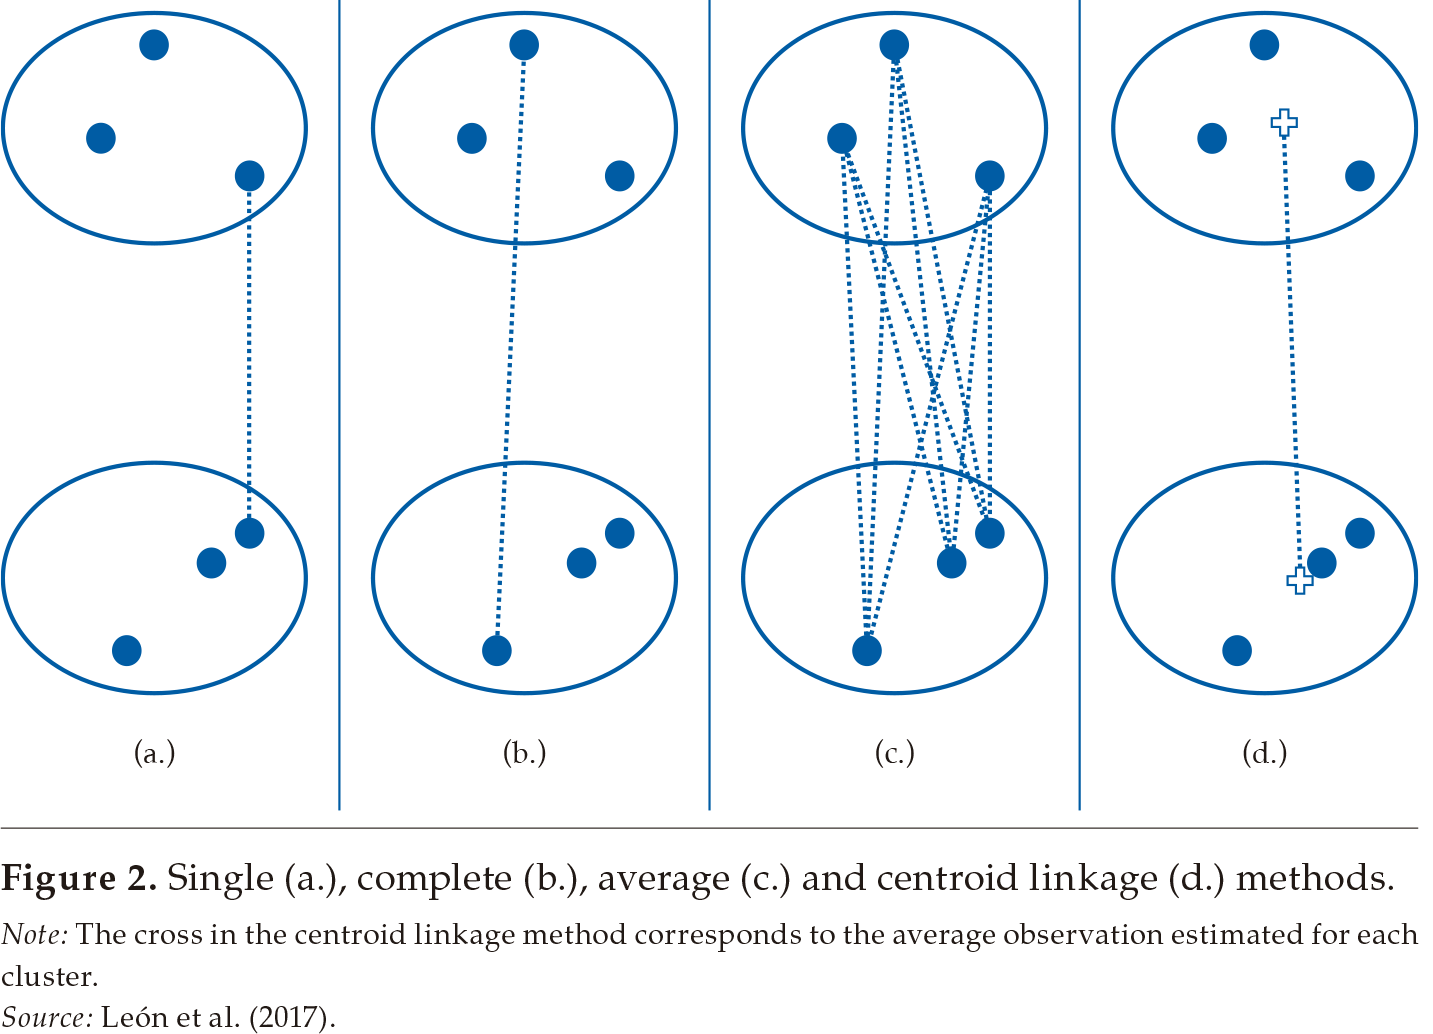 Single (a.), complete (b.), average (c.) and centroid linkage (d.) methods.